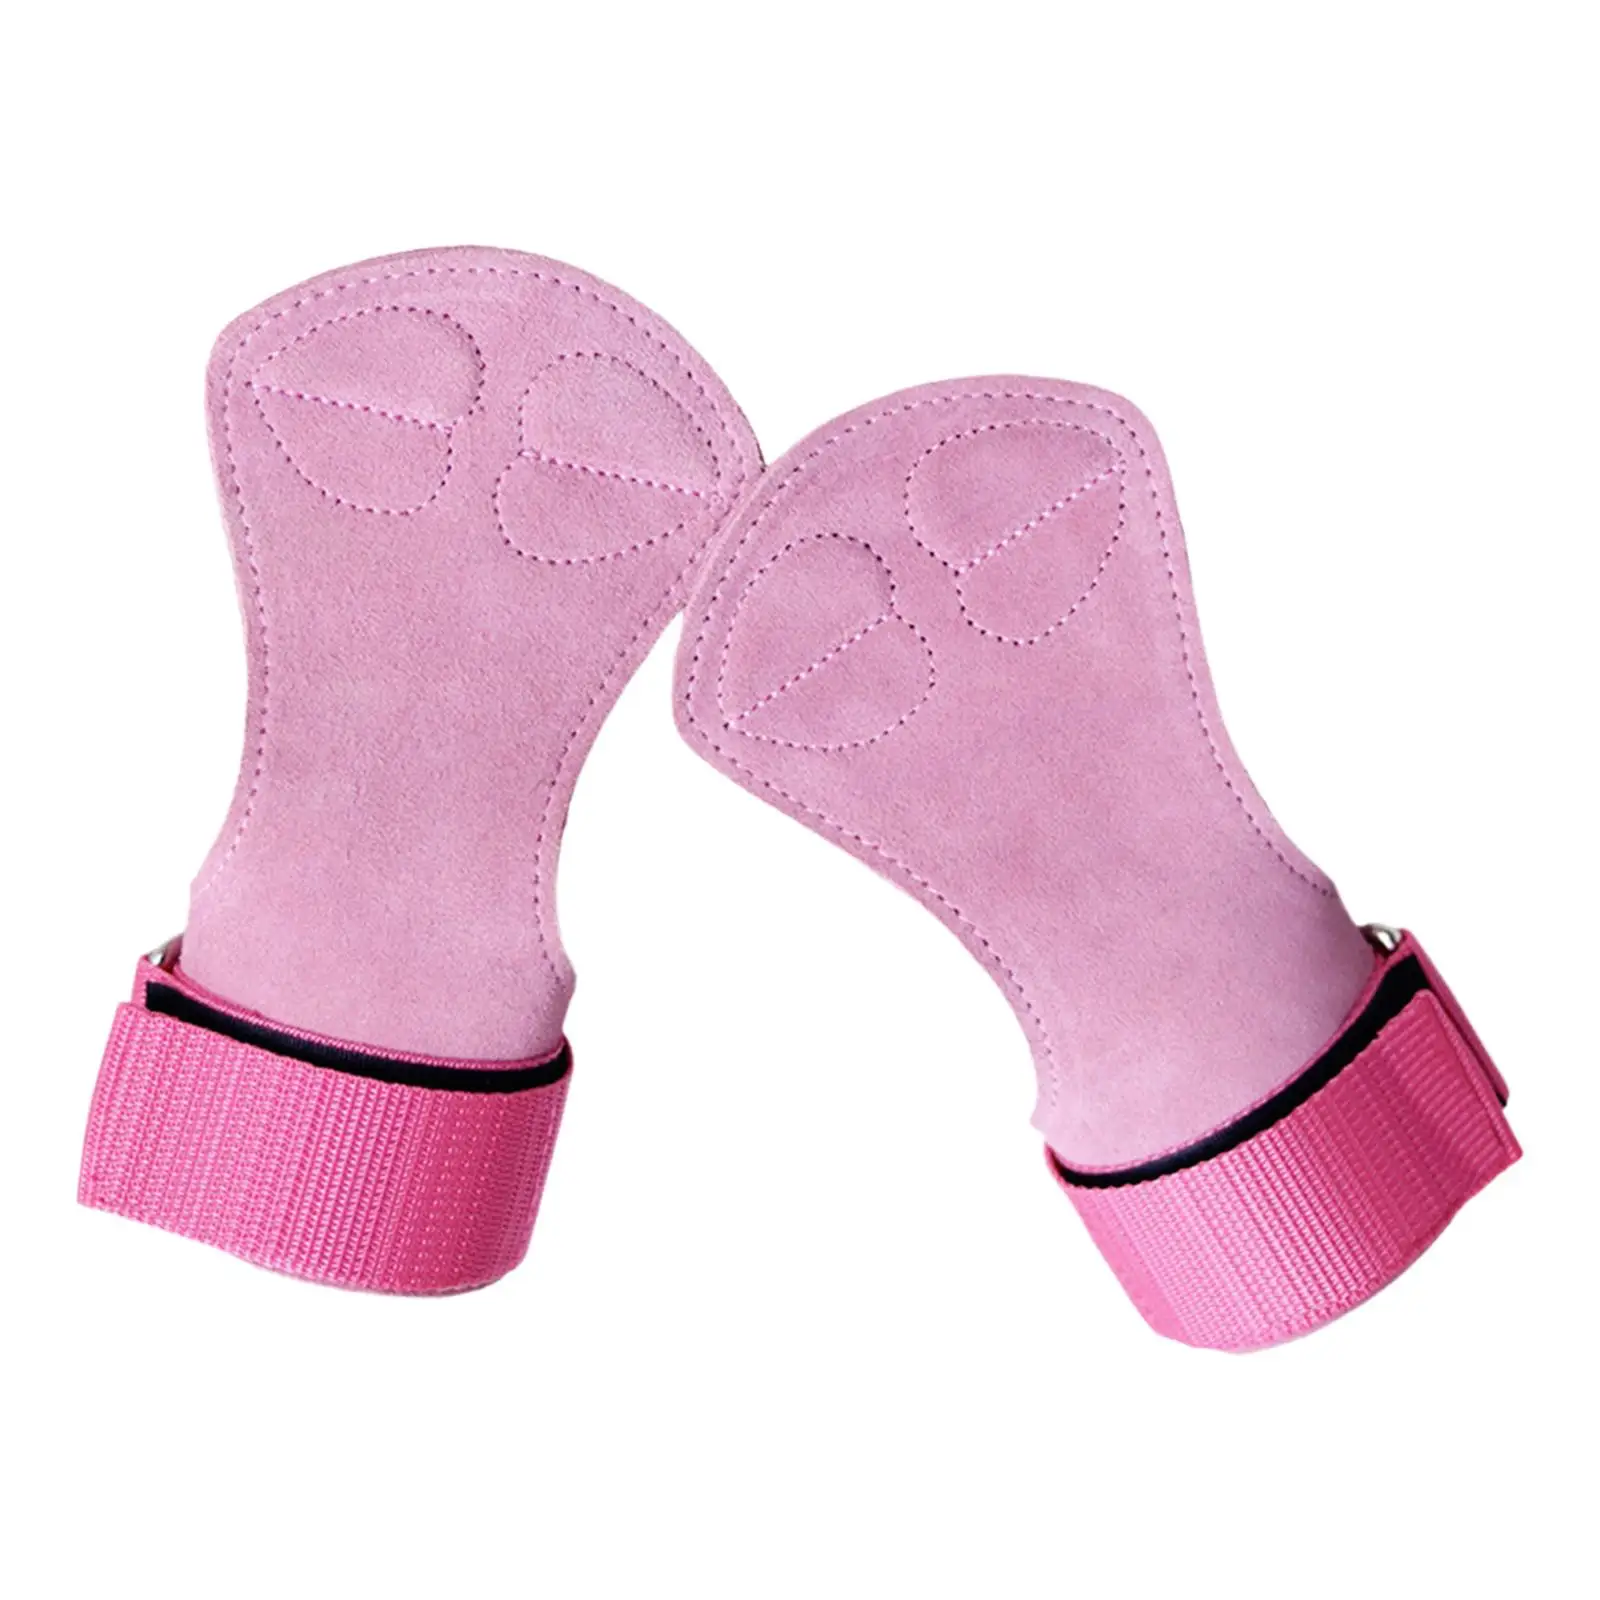 Anti Slip Weight Lifting Gloves Leather Palm Protection Durable Deadlifts Workout Gloves Lifting Pads for Workout Cycling Gym